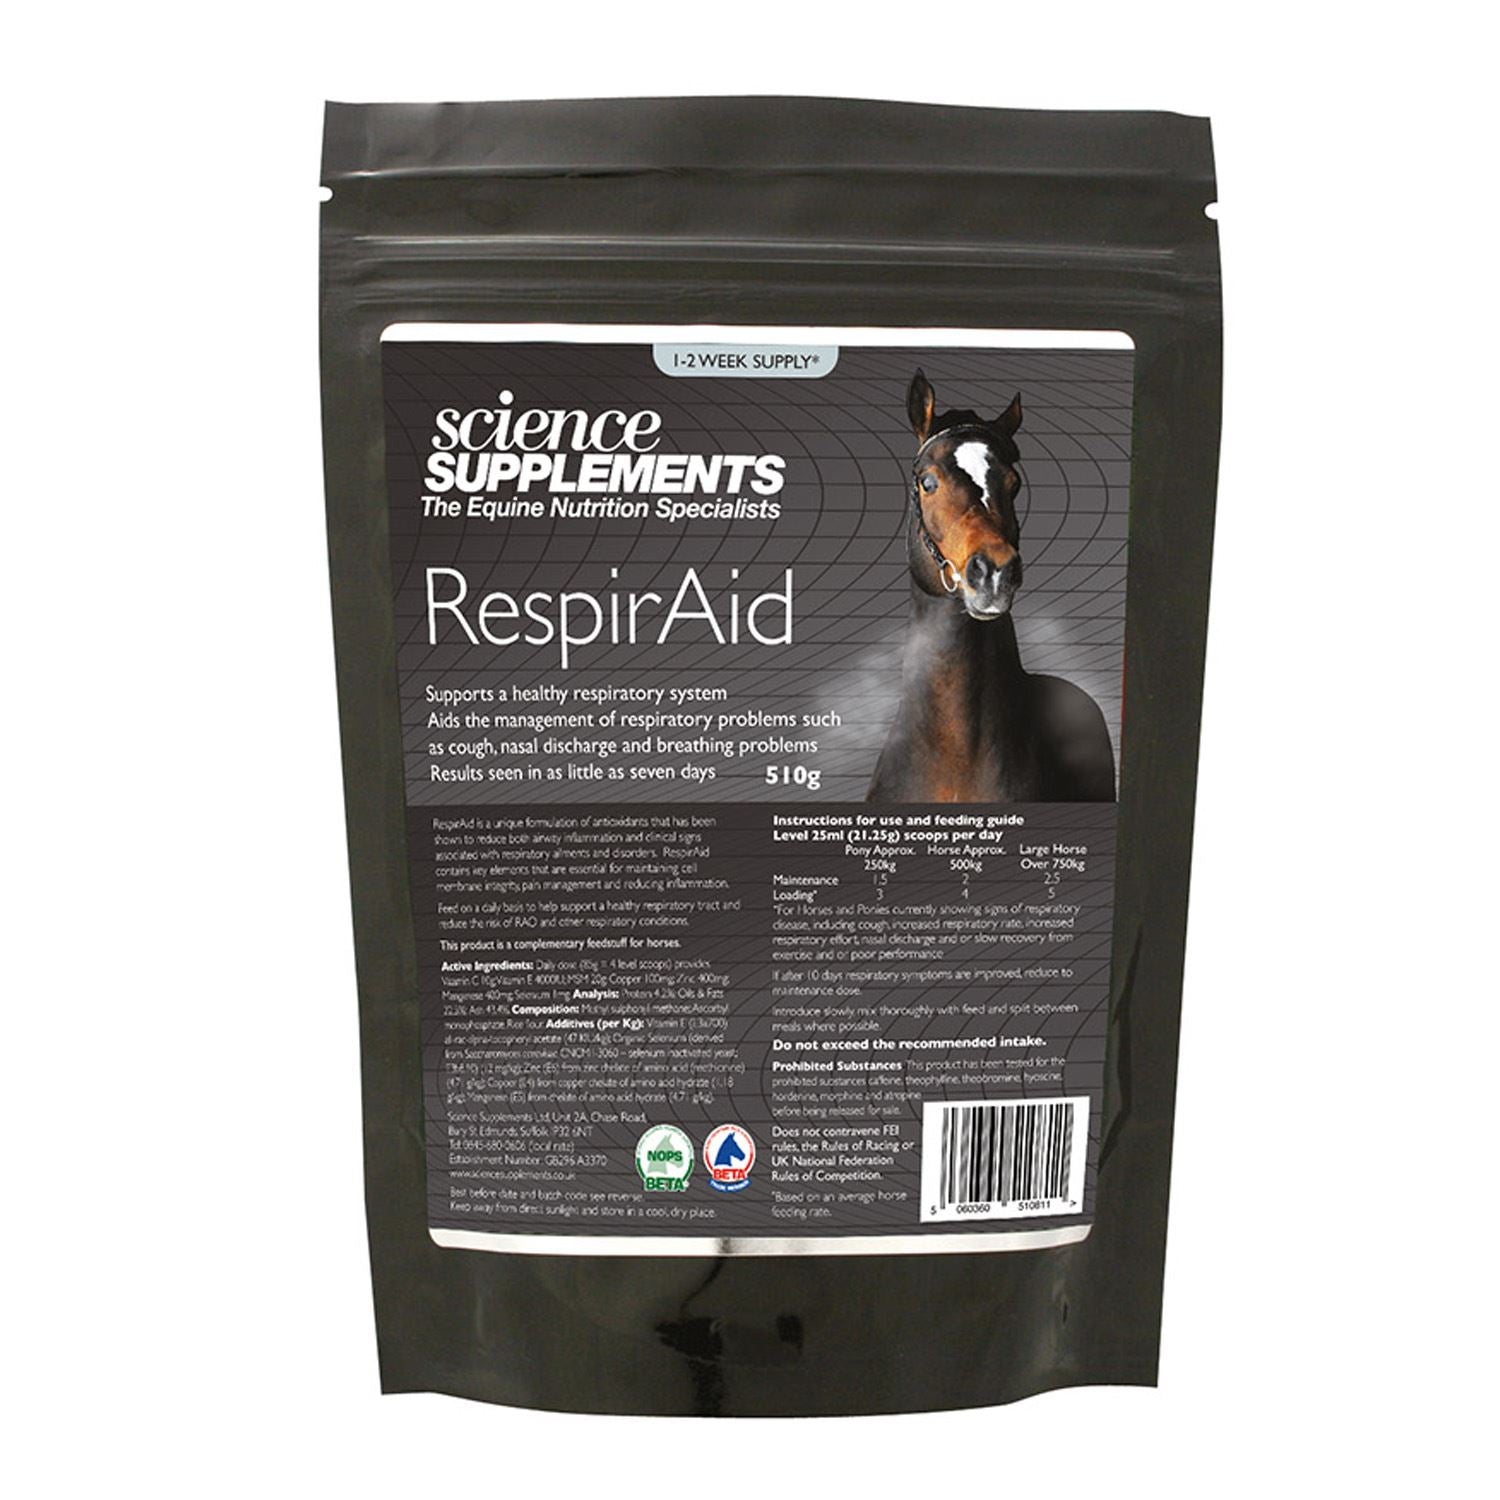 Science Supplements Respiraid - Just Horse Riders